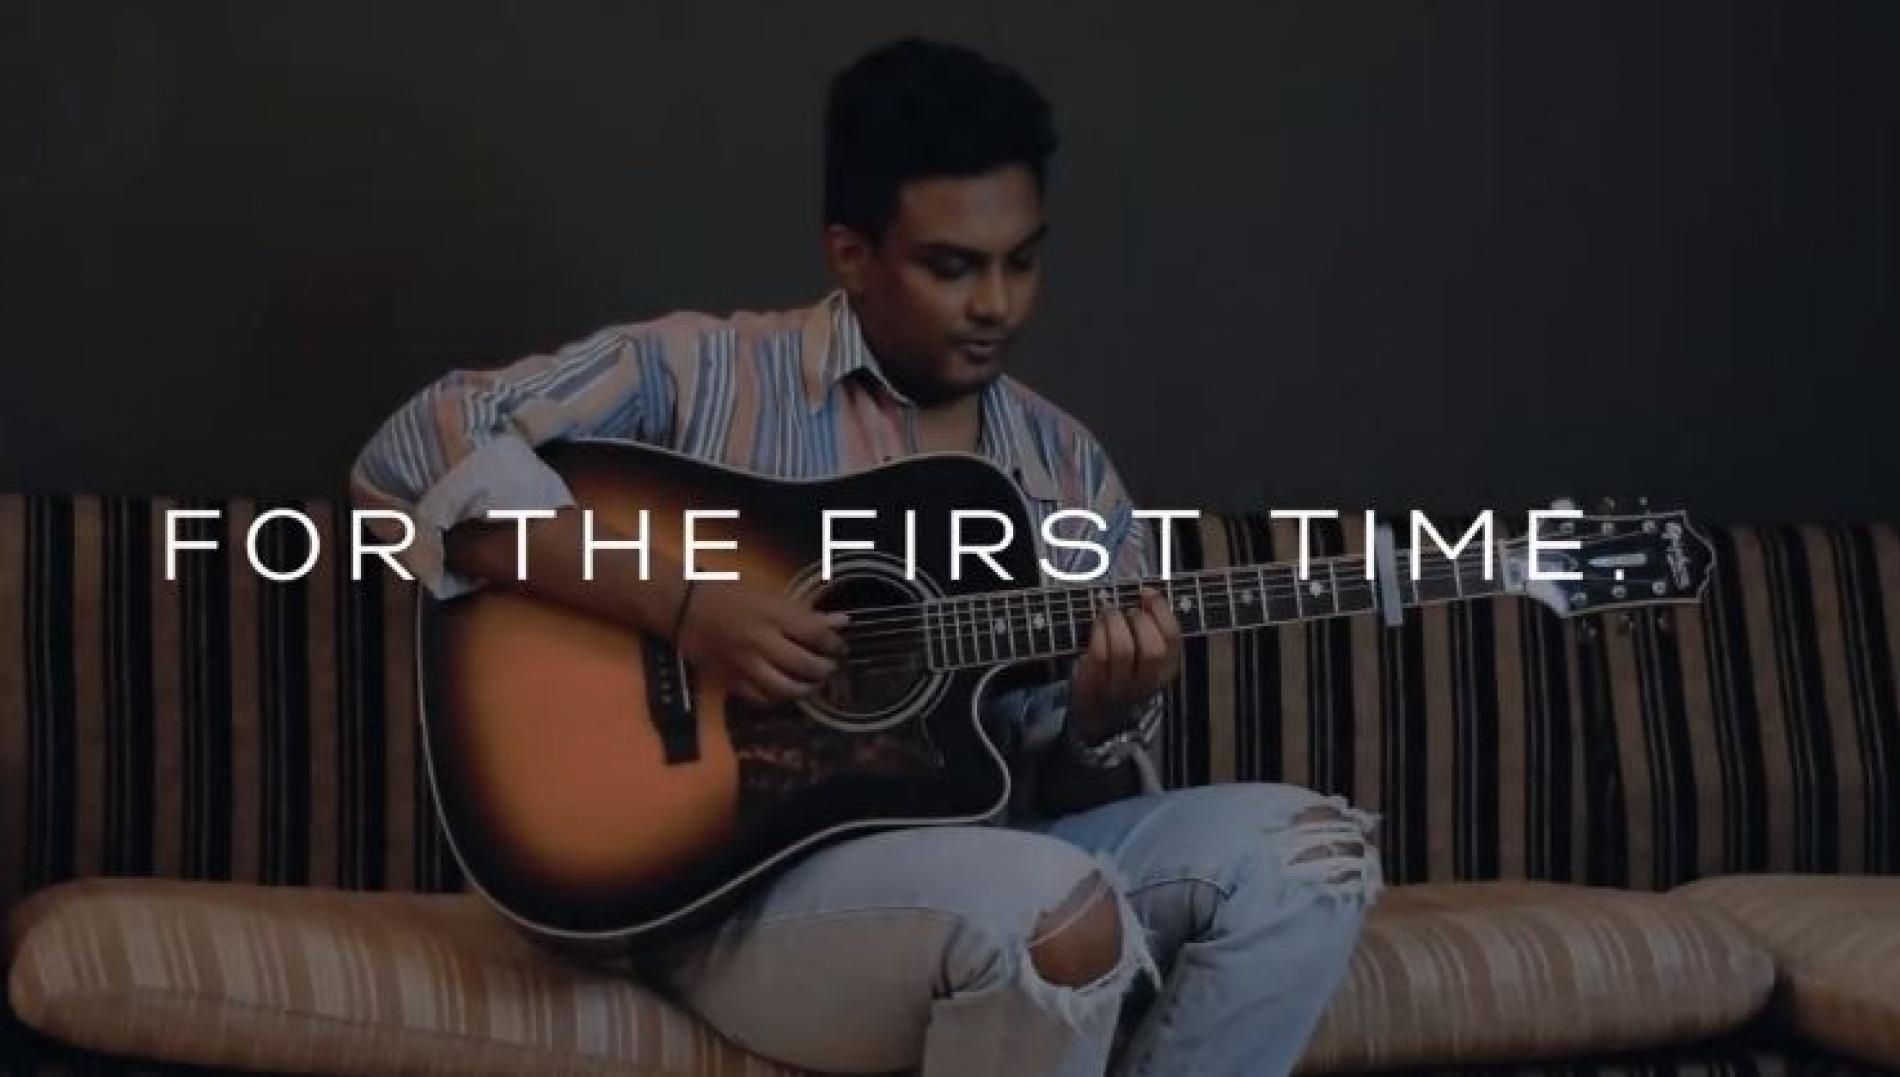 New Music : The Script – For The First Time (Ryan de Mel Acoustic Cover)